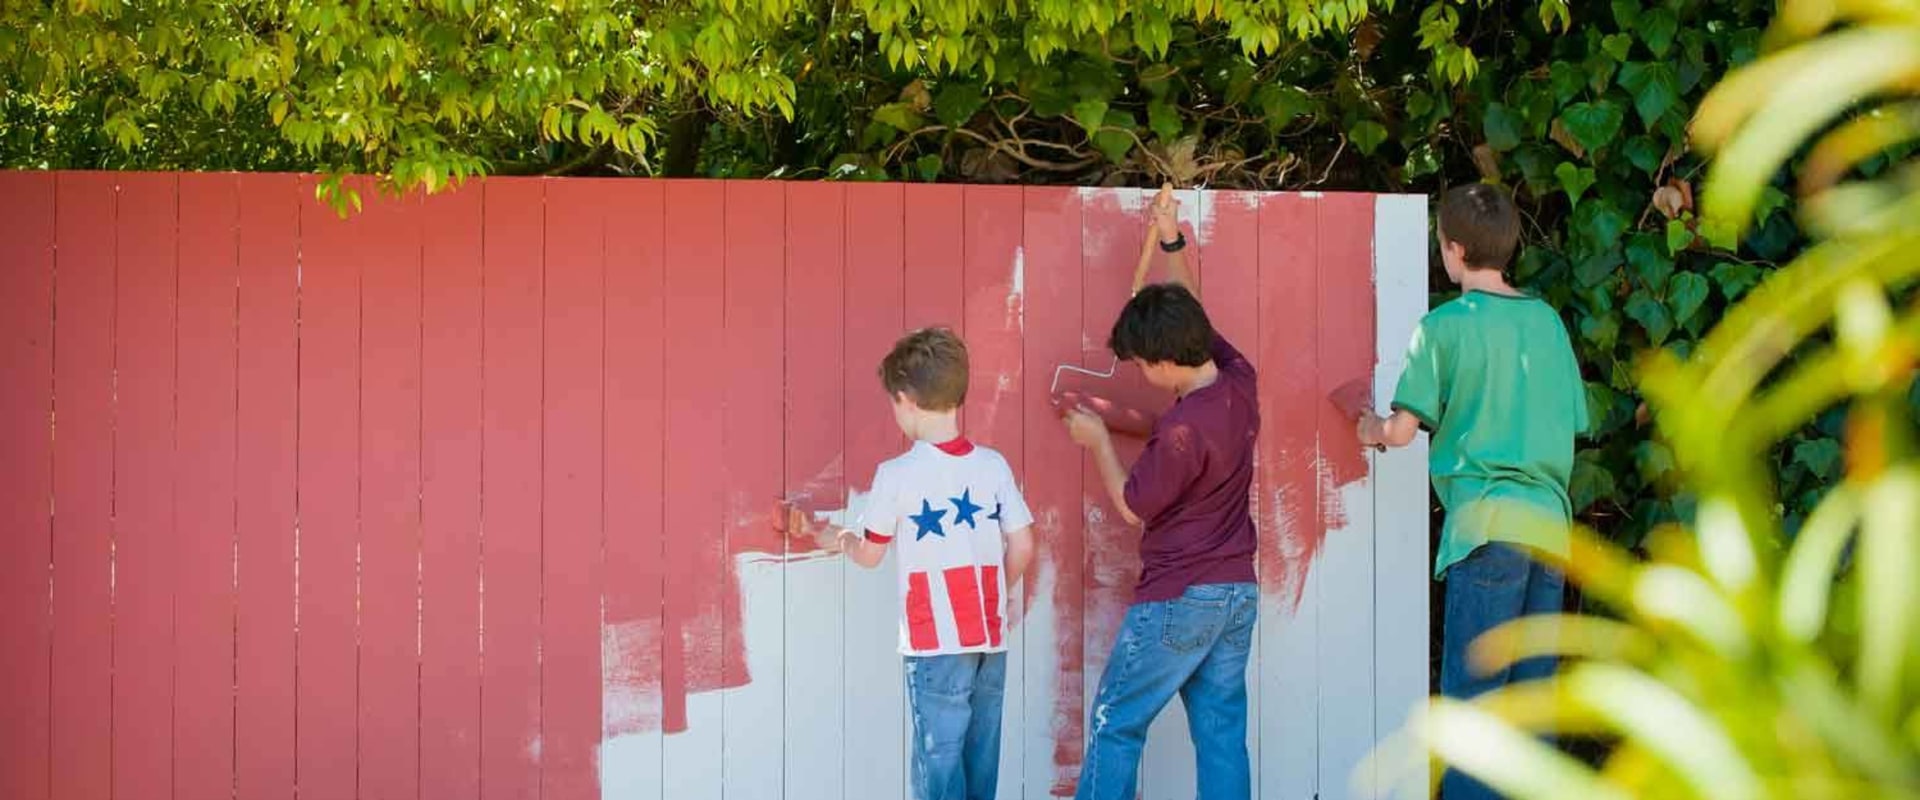 Painting a Vinyl Fence: Preparing the Vinyl for Painting